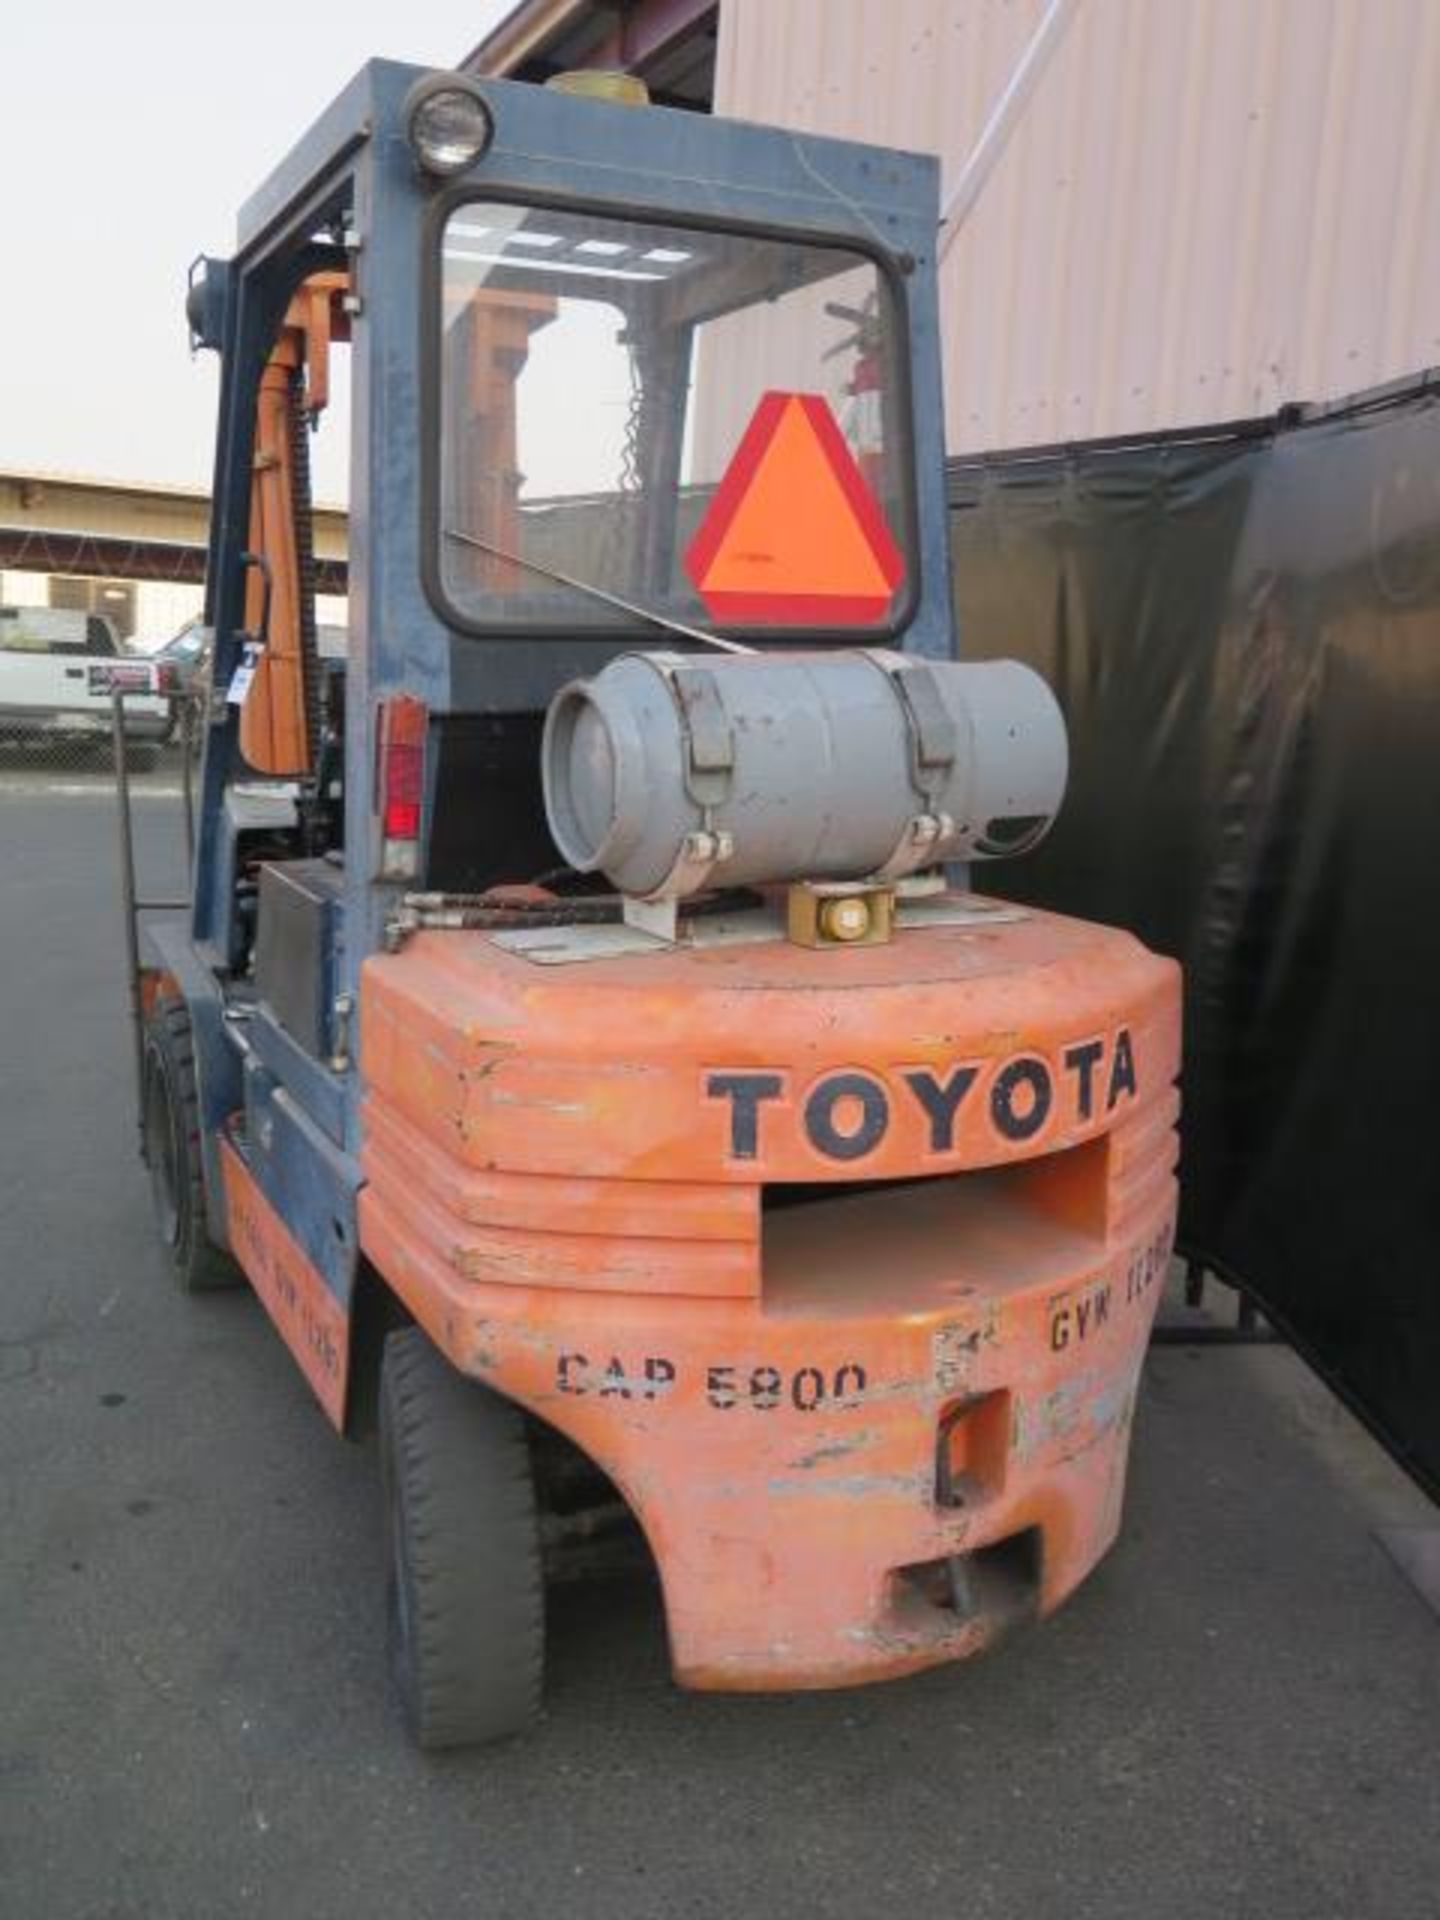 Toyota 02-5FGC30 5800 Lb Cap LPG Forklift s/n 5FGC30-11577 w/ 3-Stage Mast, Side Shift, SOLD AS IS - Image 2 of 11